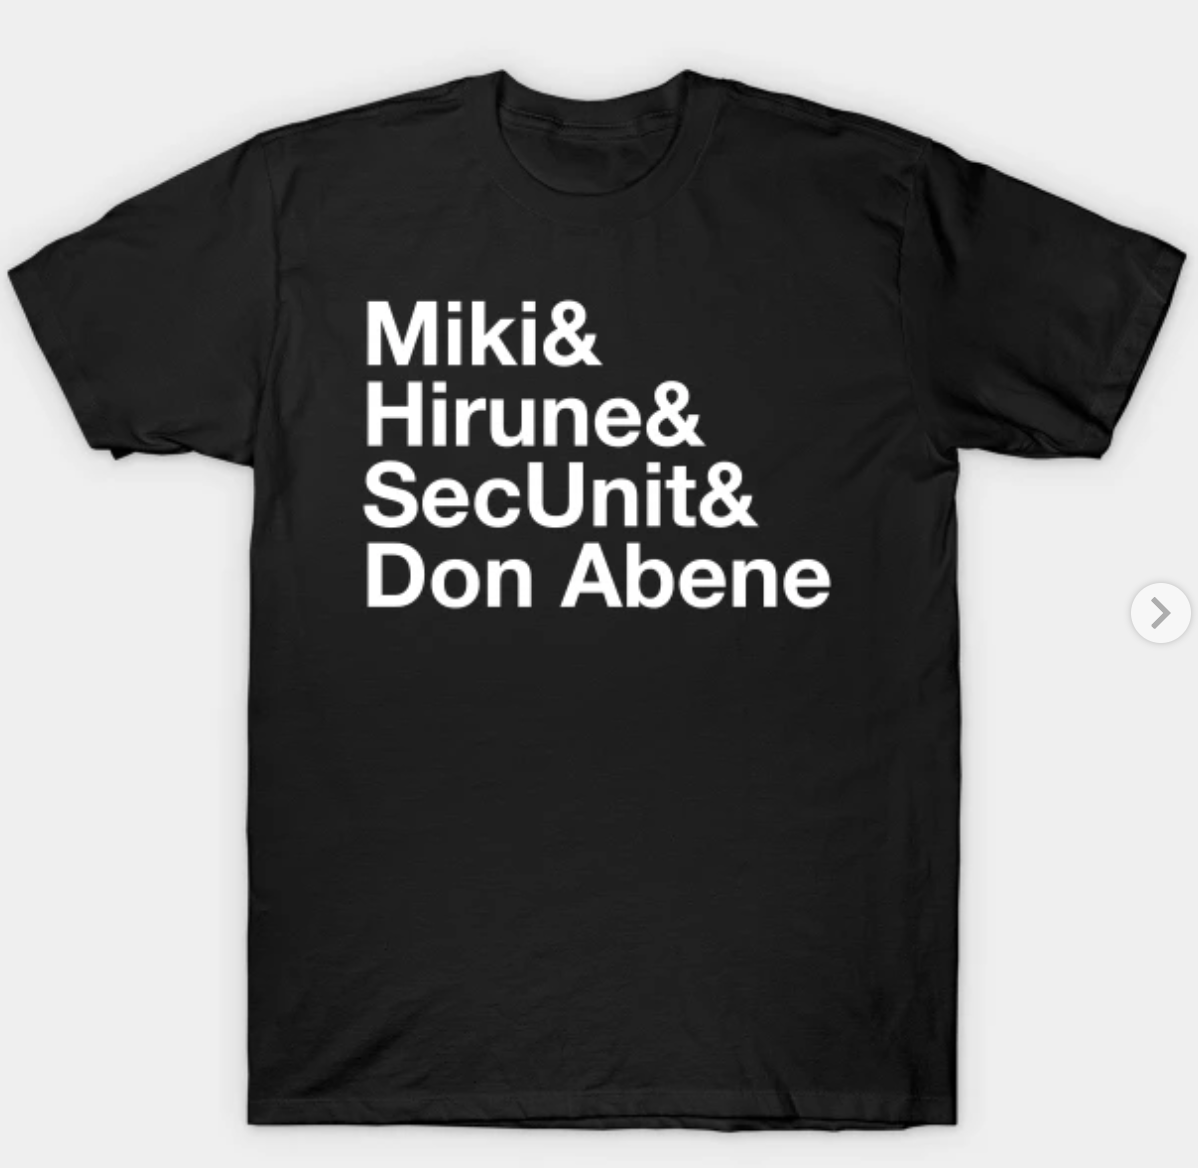 A black t-shirt with white writing that says "Miki & Hirune & SecUnit & Don Abene"